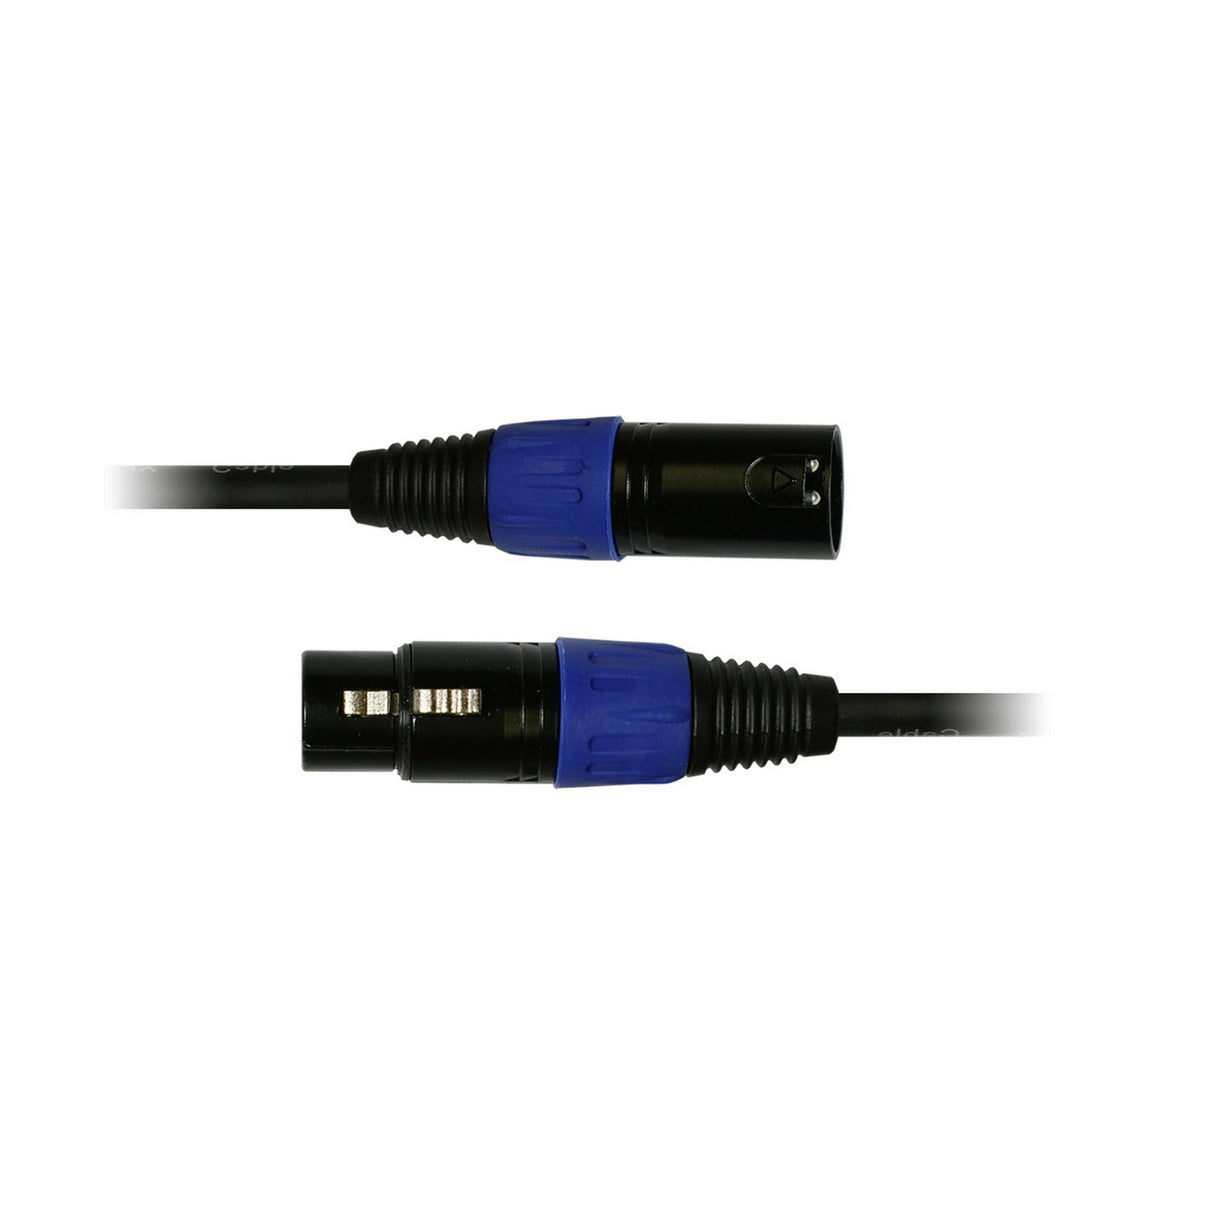 Blizzard Lighting DMX-5PIN-MALE-TURN | 3 Pin Female to 5 Pin Male 1 Foot Cable